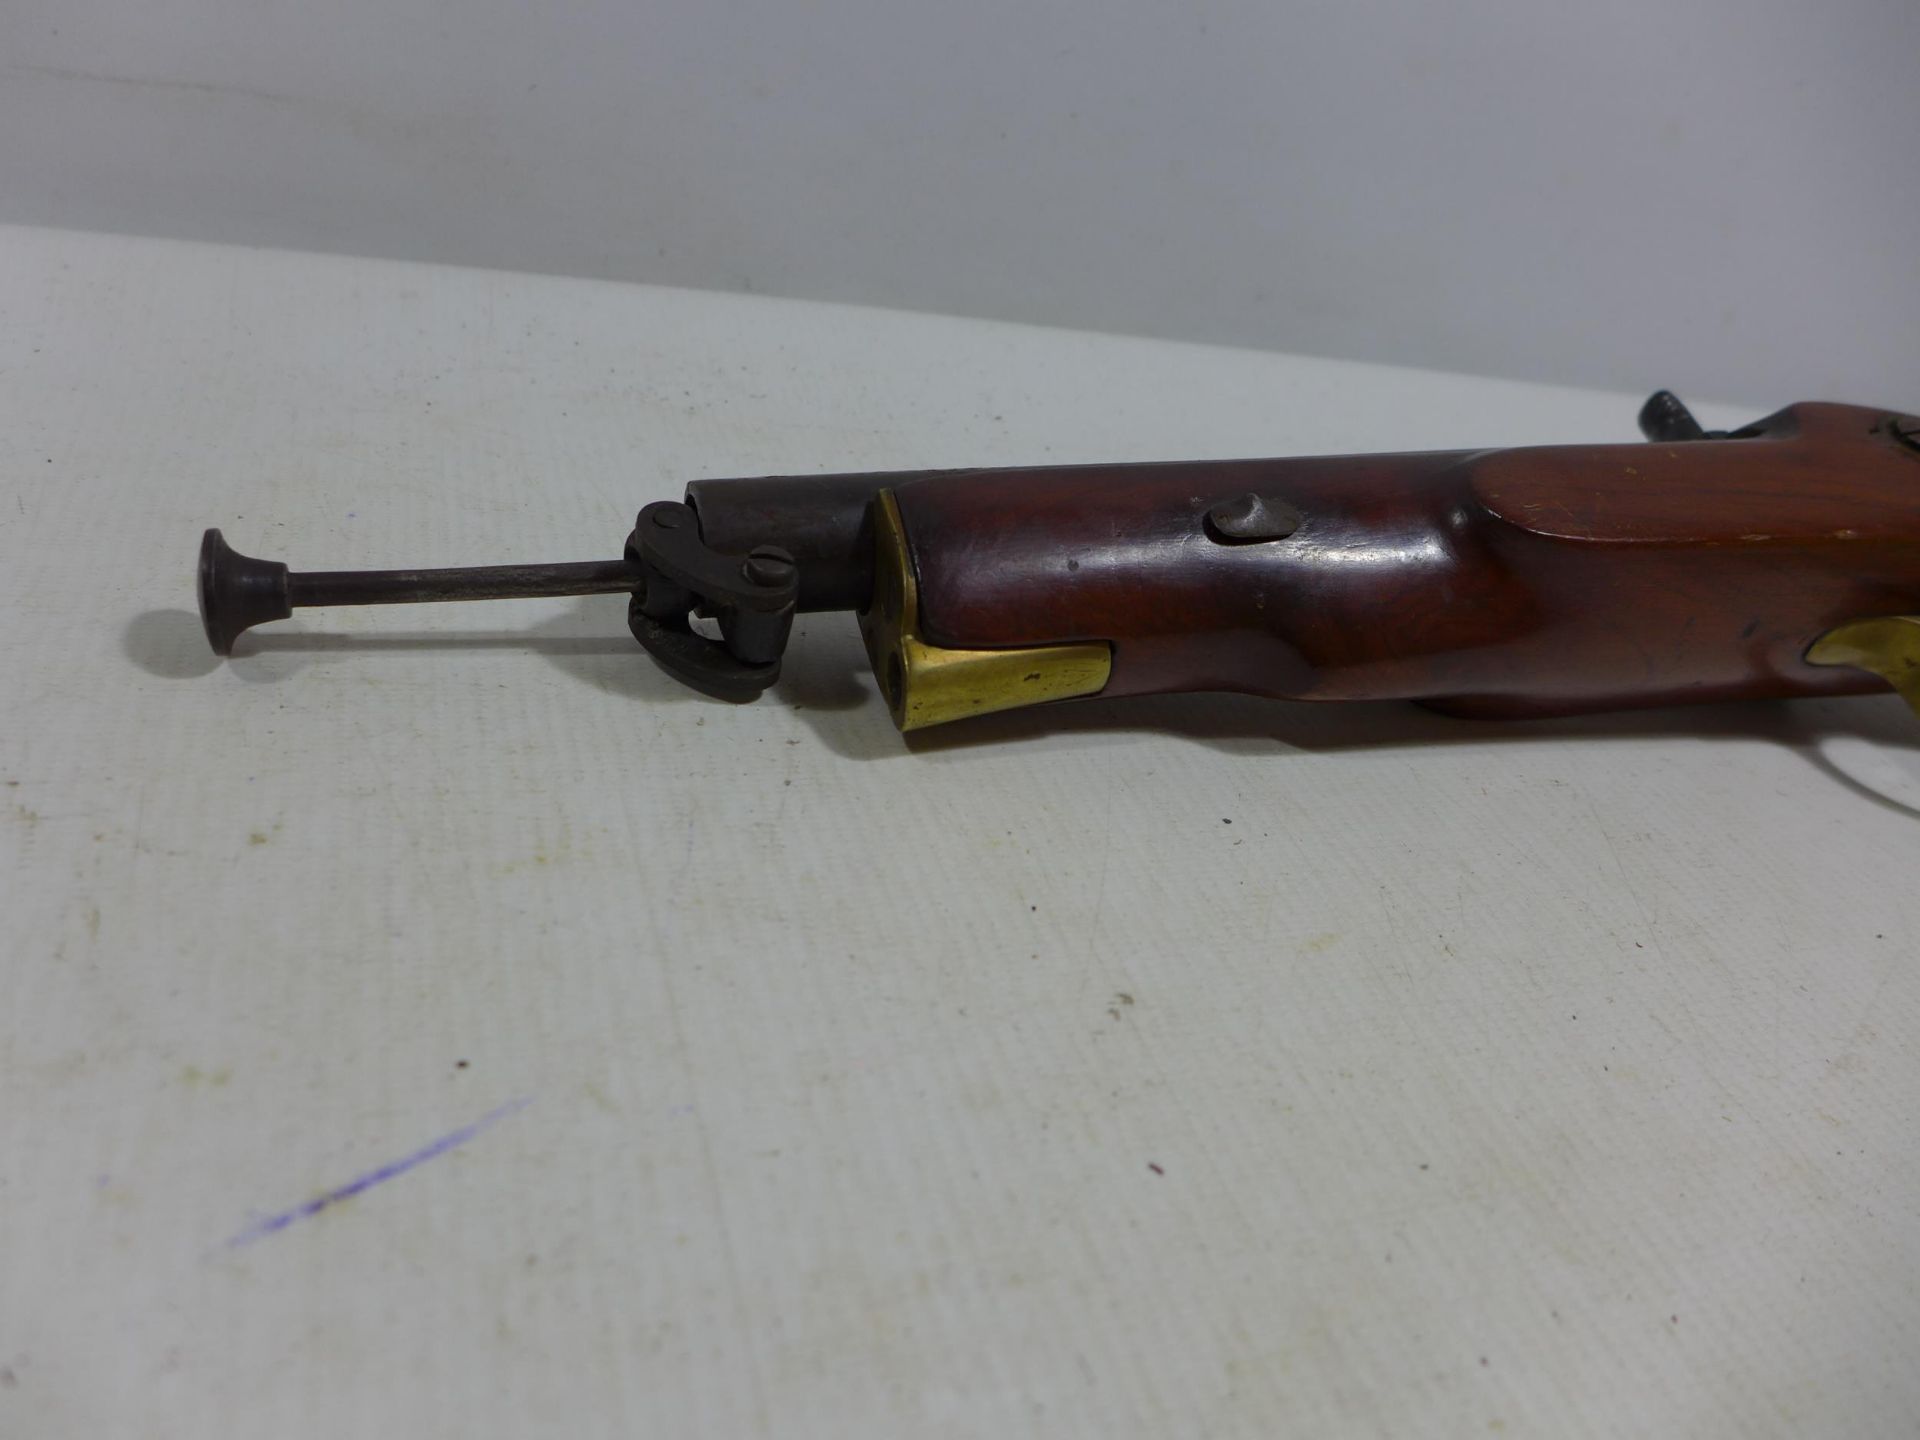 A DEACTIVATED PERCUSSION CAP PISTOL, 19.5CM BARREL, WOODEN STOCK WITH BRASS FITTINGS, LENGTH 36CM - Image 5 of 6